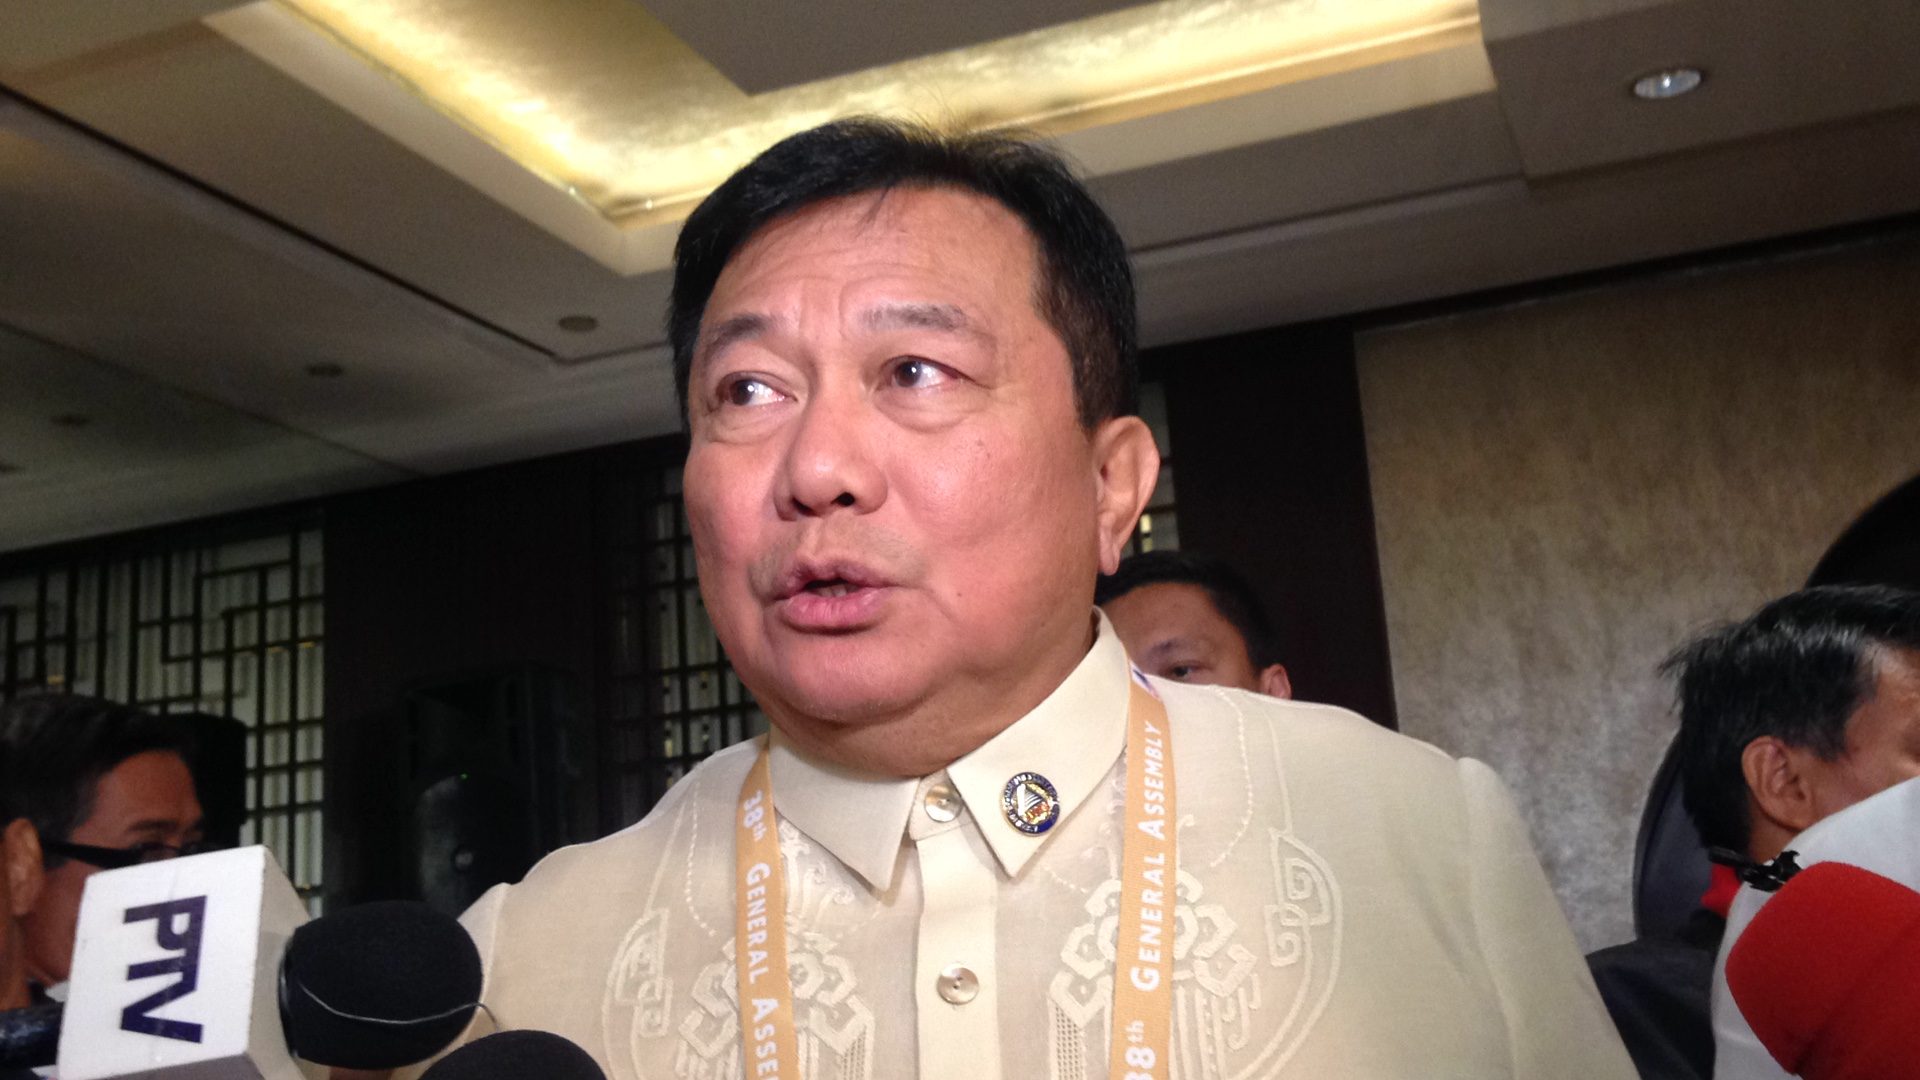 Alvarez: If Gascon resigns, CHR commissioners should resign too